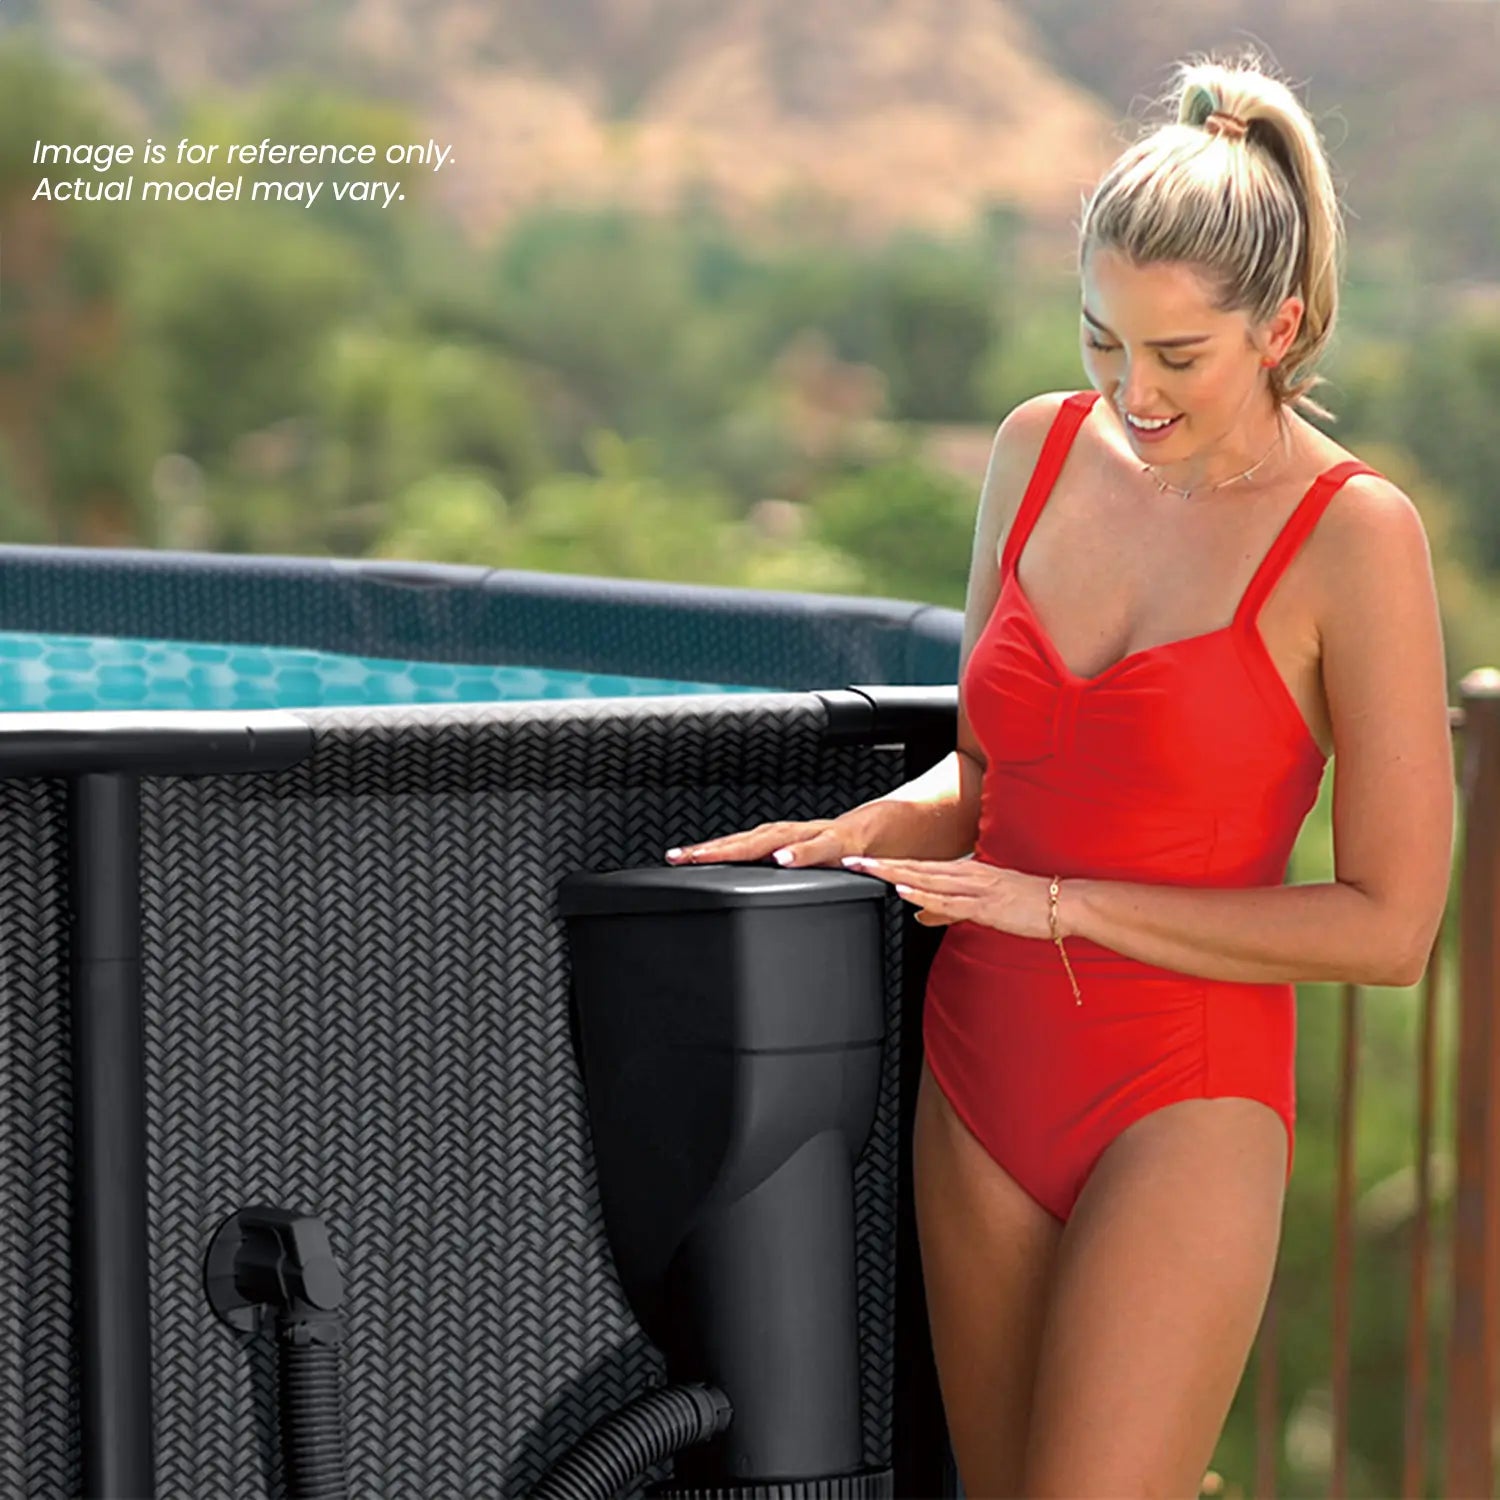 Funsicle SFX1000 SkimmerPlus Filter Pump attached to Funsicle Oasis Designer Pool with a model standing next to it